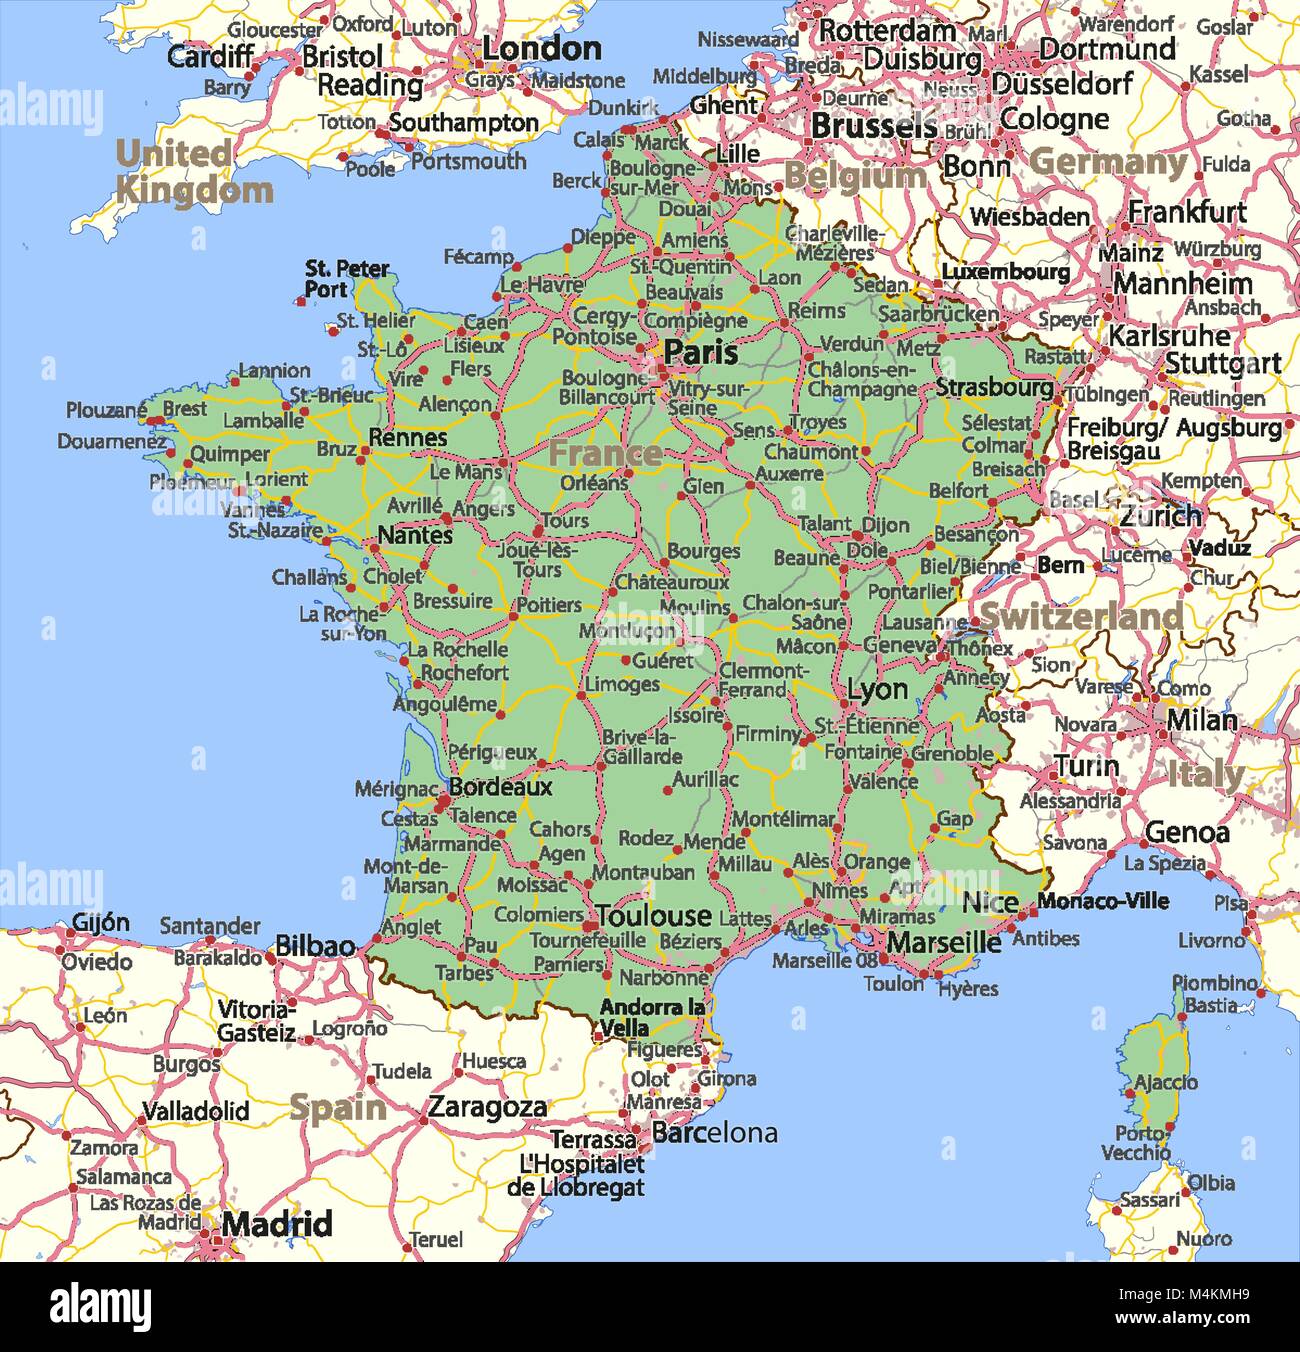 carte pays frontiere france